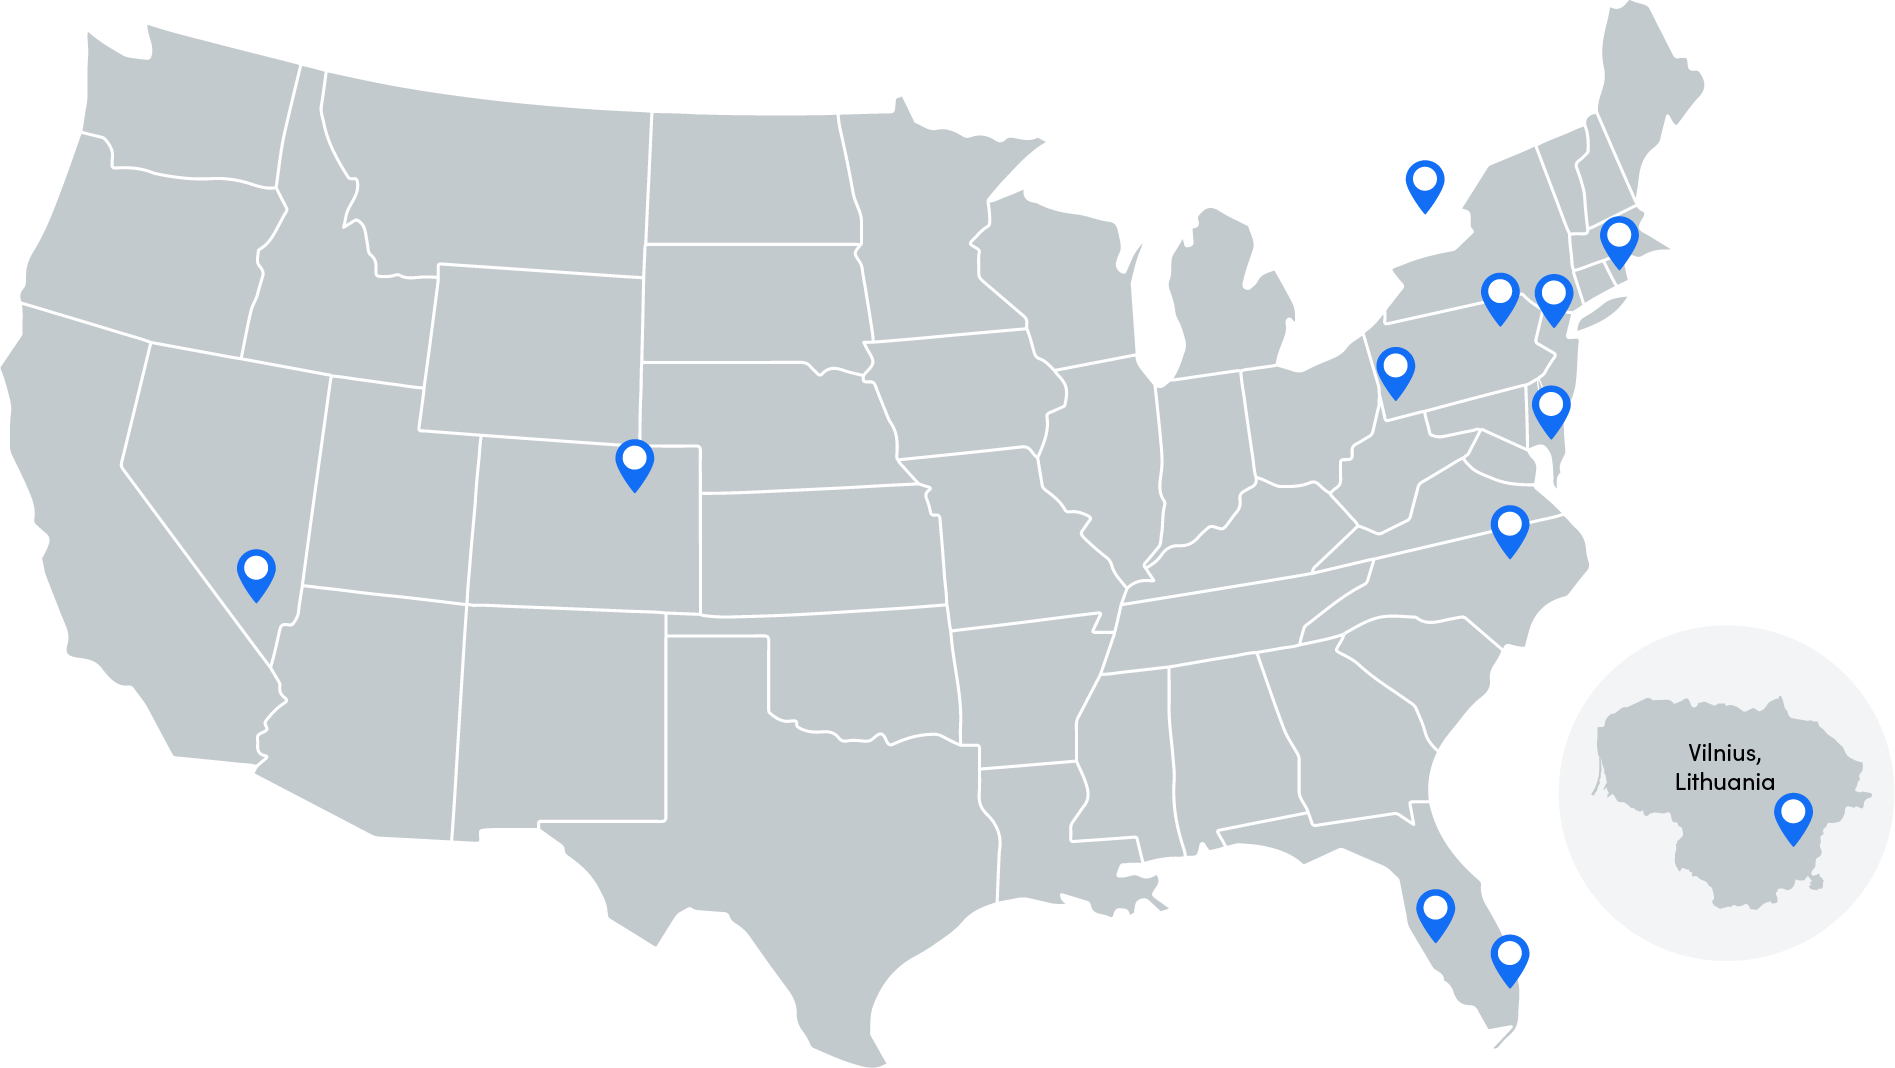 A map of all Shift4 office locations in the United States.